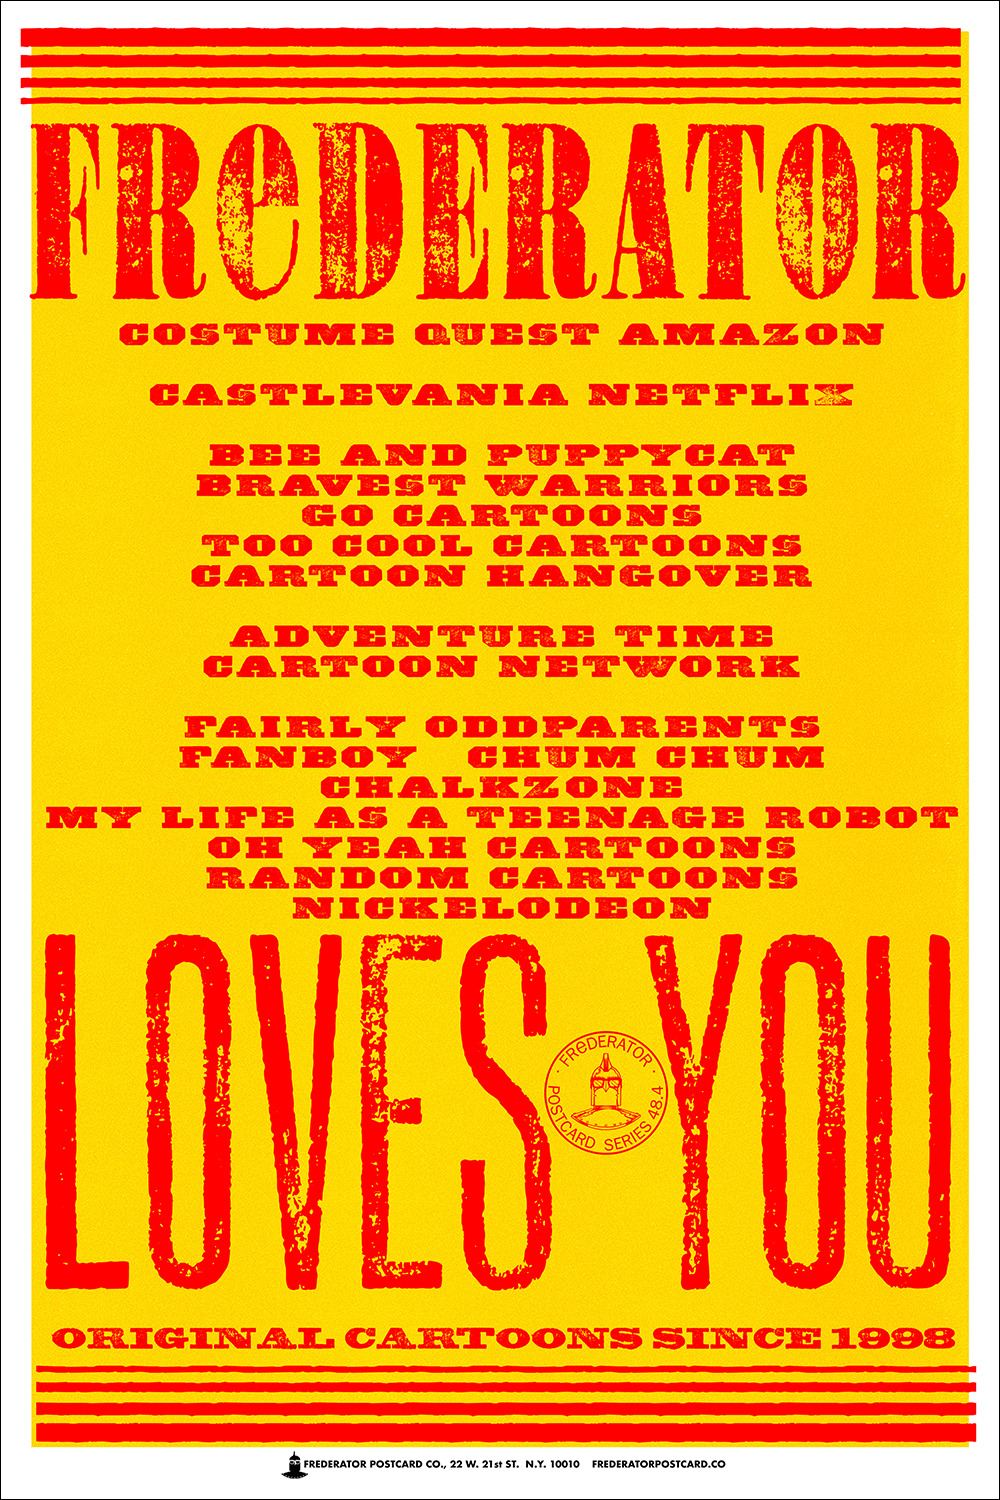 fred-frederator-studios:
“ Hatch Show Print made a bunch of posters for Frederator right at the beginning and we’ve never forgotten them.
……
From the postcard back:
Frederator loves you
Congratulations!
You are one of 300 people
to receive this...